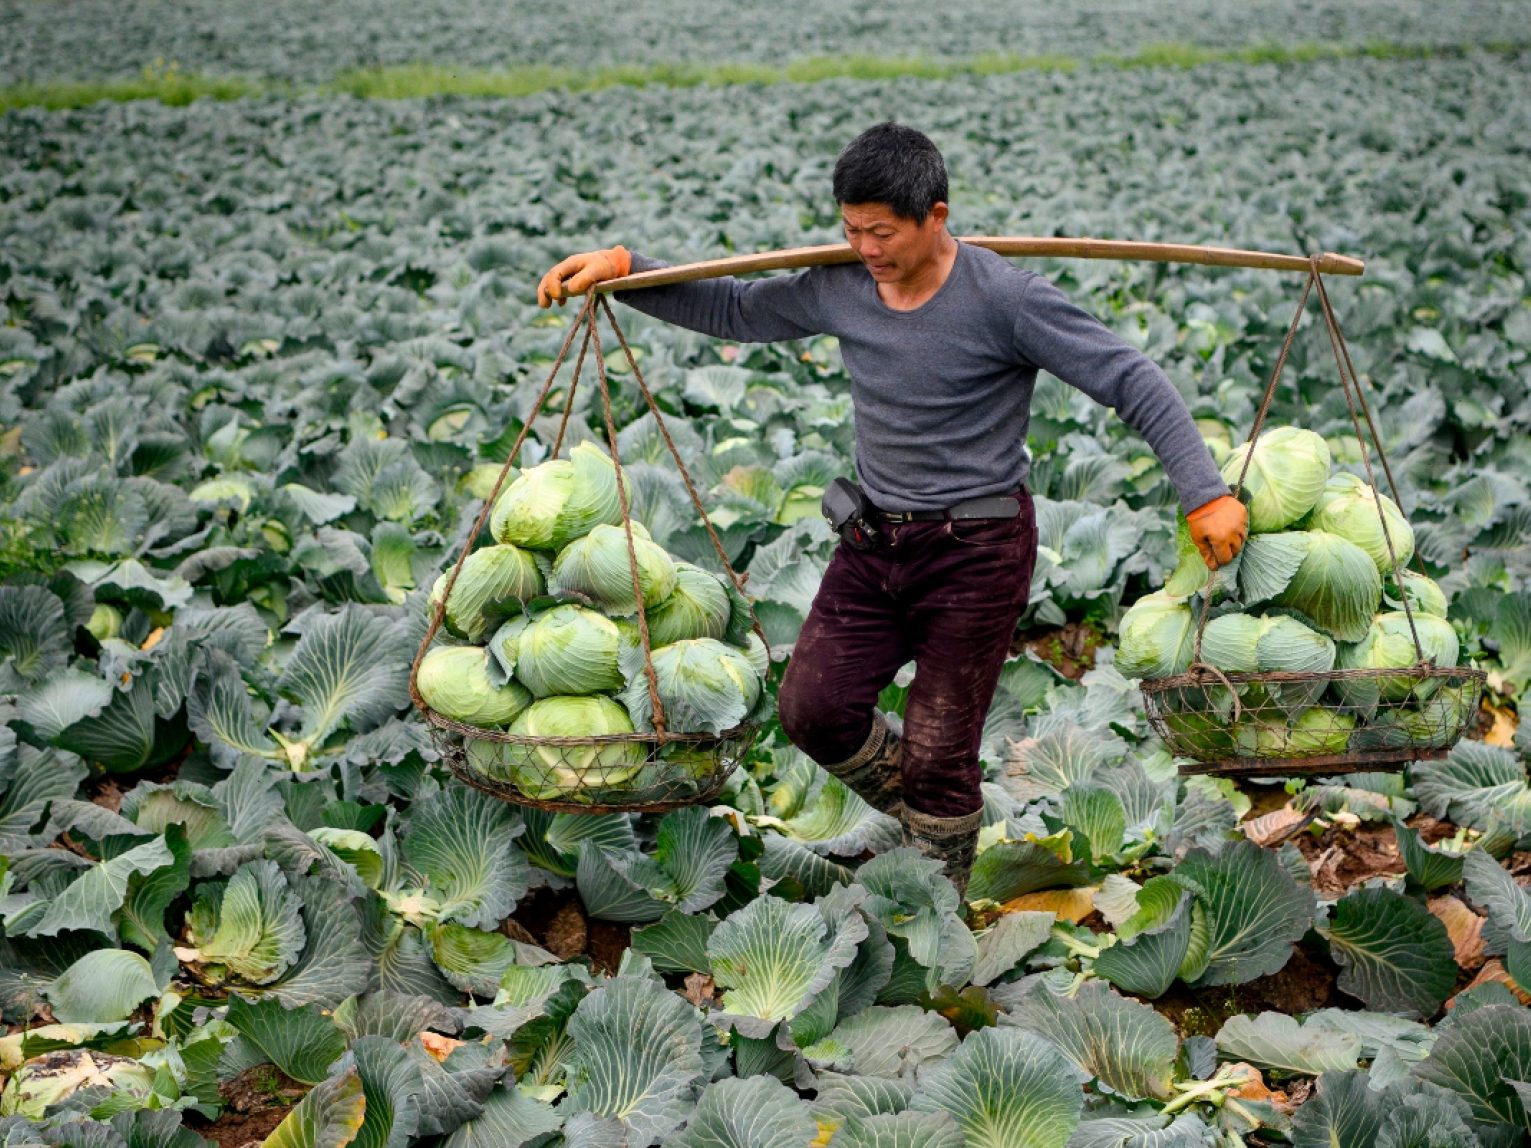 Chinese farmers have largely been left out of the country's economic miracle.